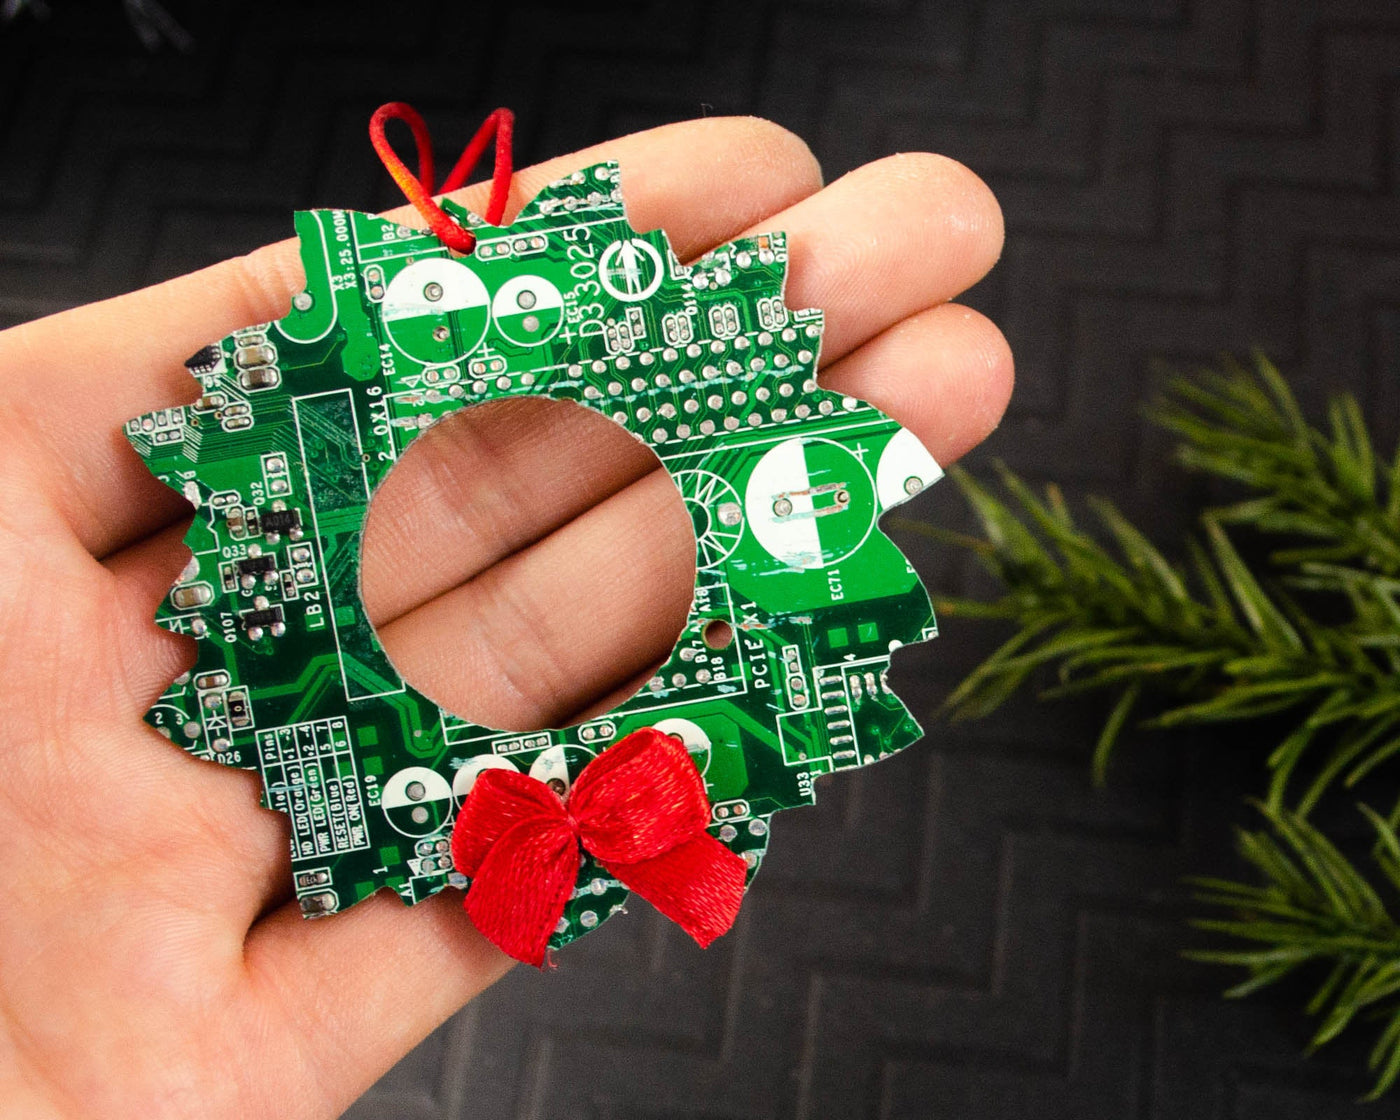 handmade green circuit board wreath ornament with red satin bow